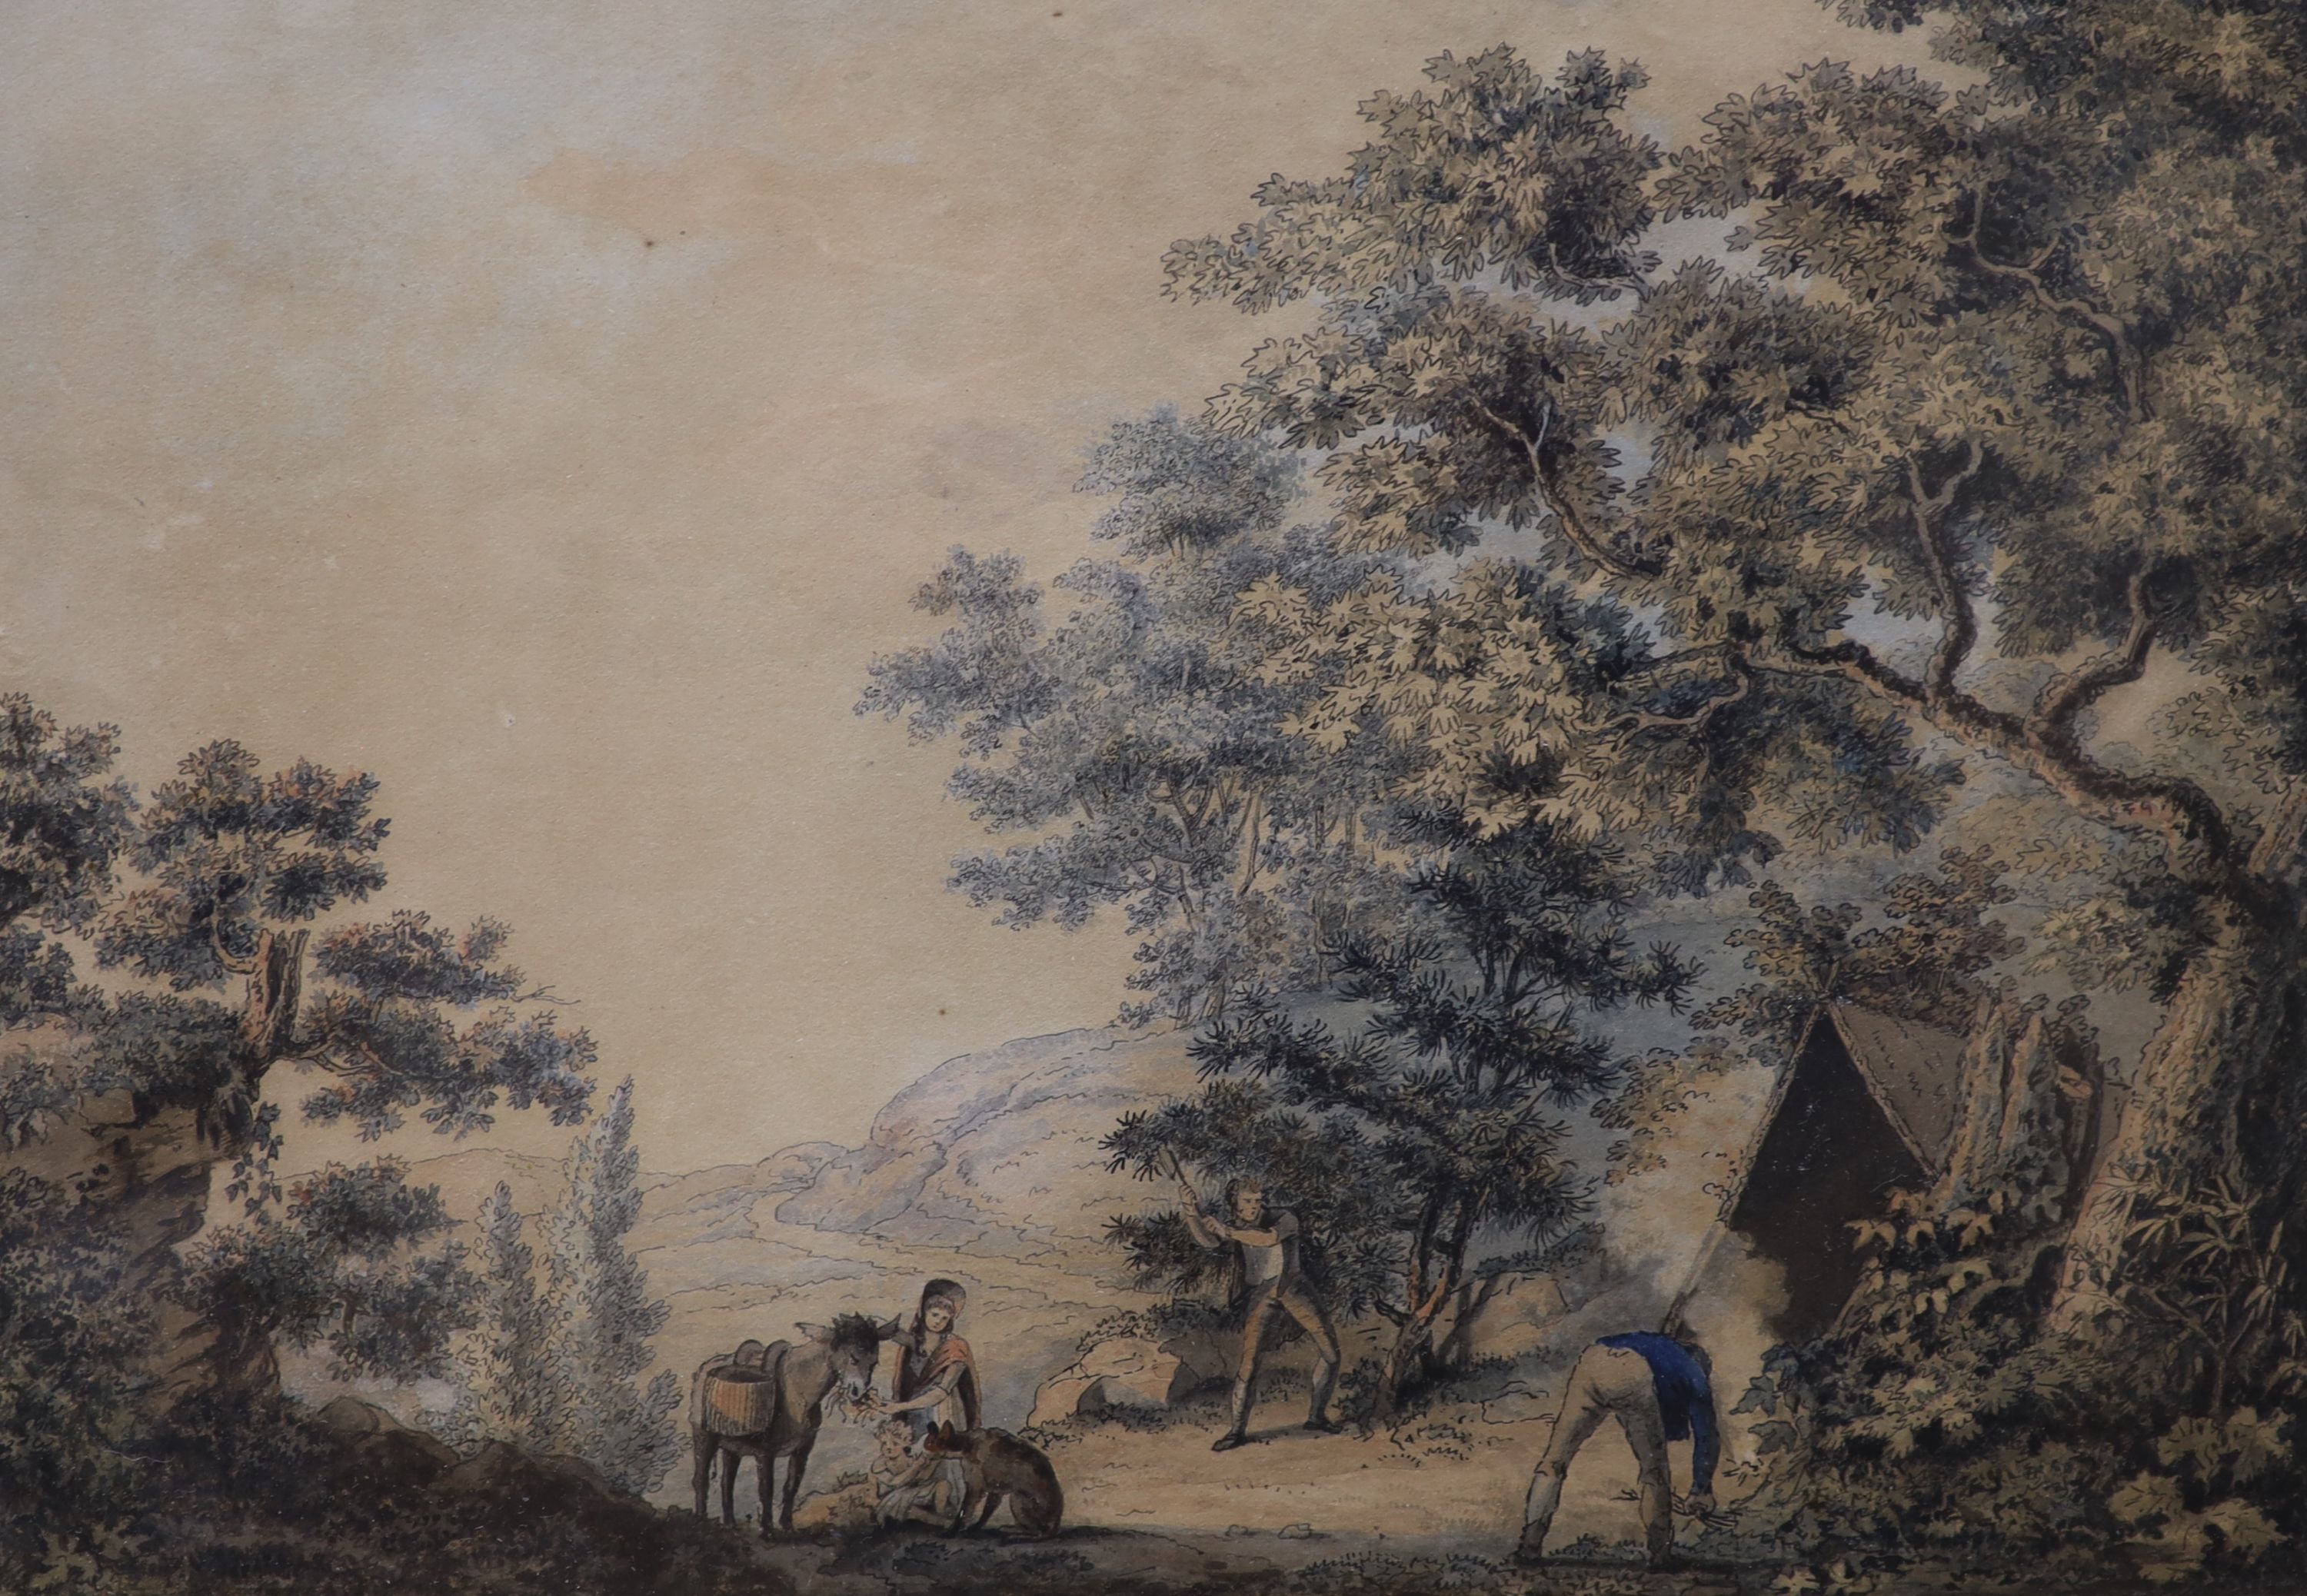 Samuel Hieronymus Grimm (1733-1794), pen, ink and watercolour, 'Making Camp', Abbott & Holder label